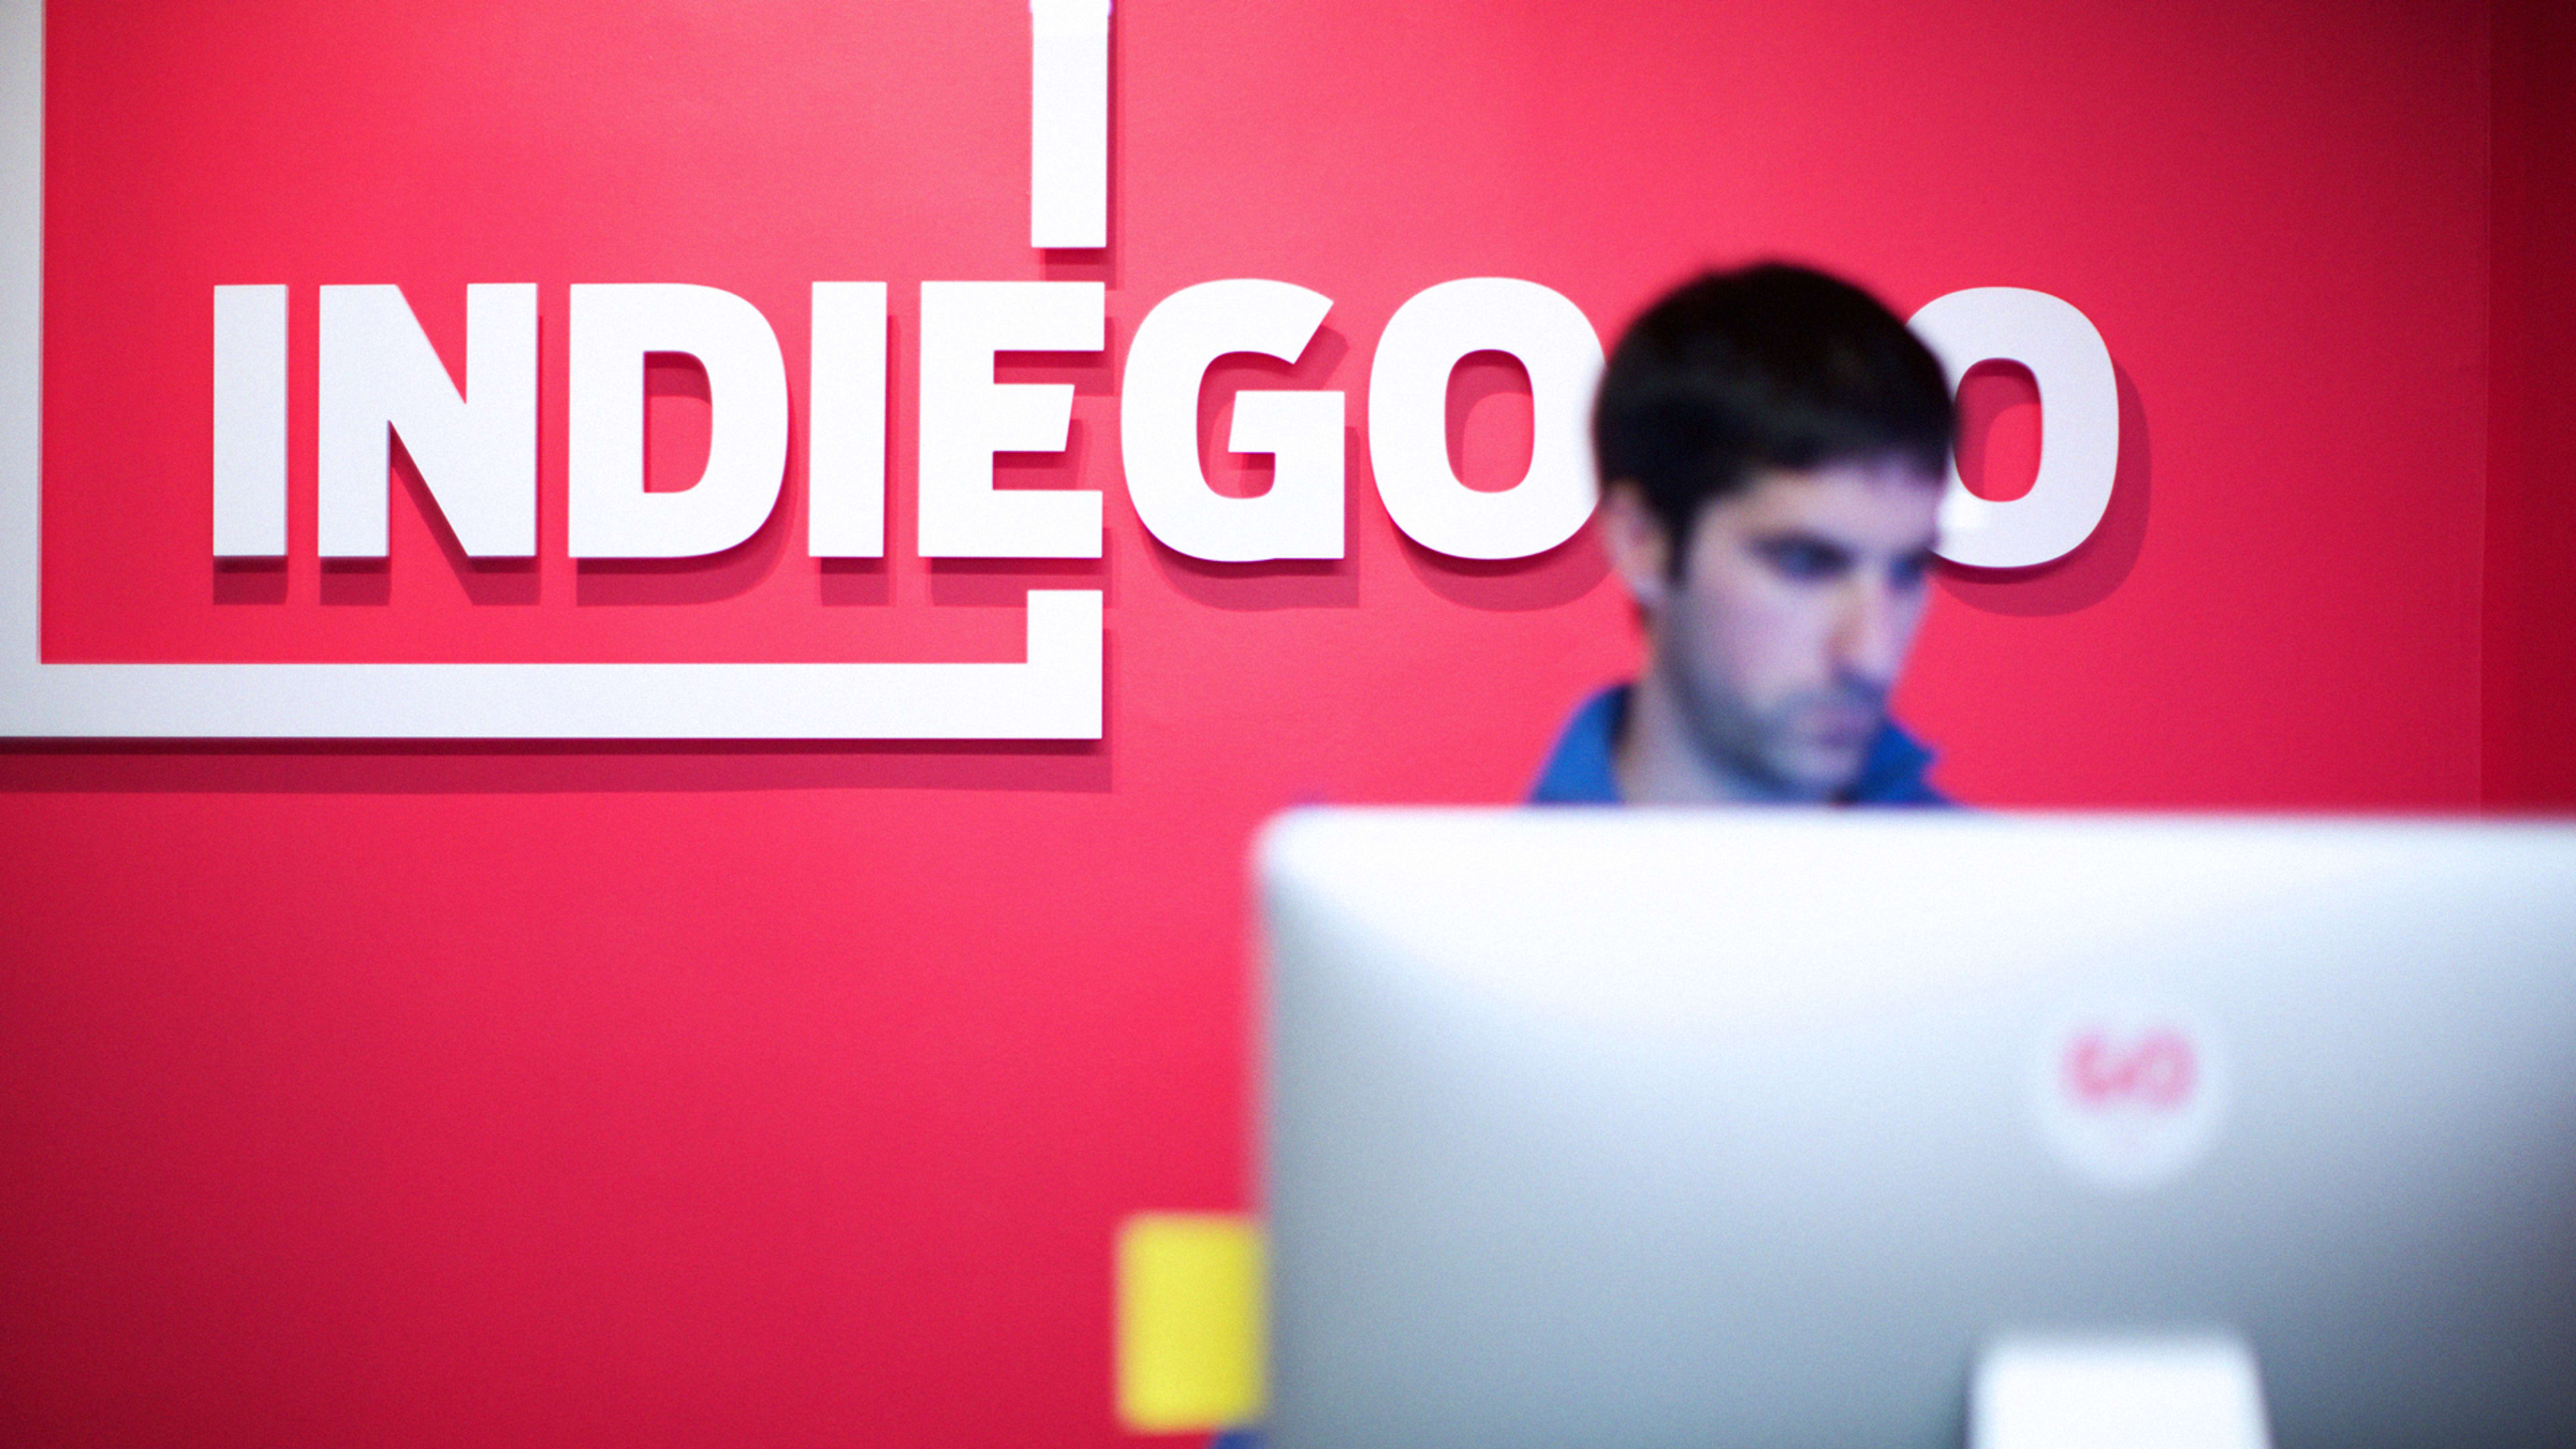 Indiegogo Says It’s Raised Close To $1.5 Billion For Projects, And Will Soon Turn A Profit